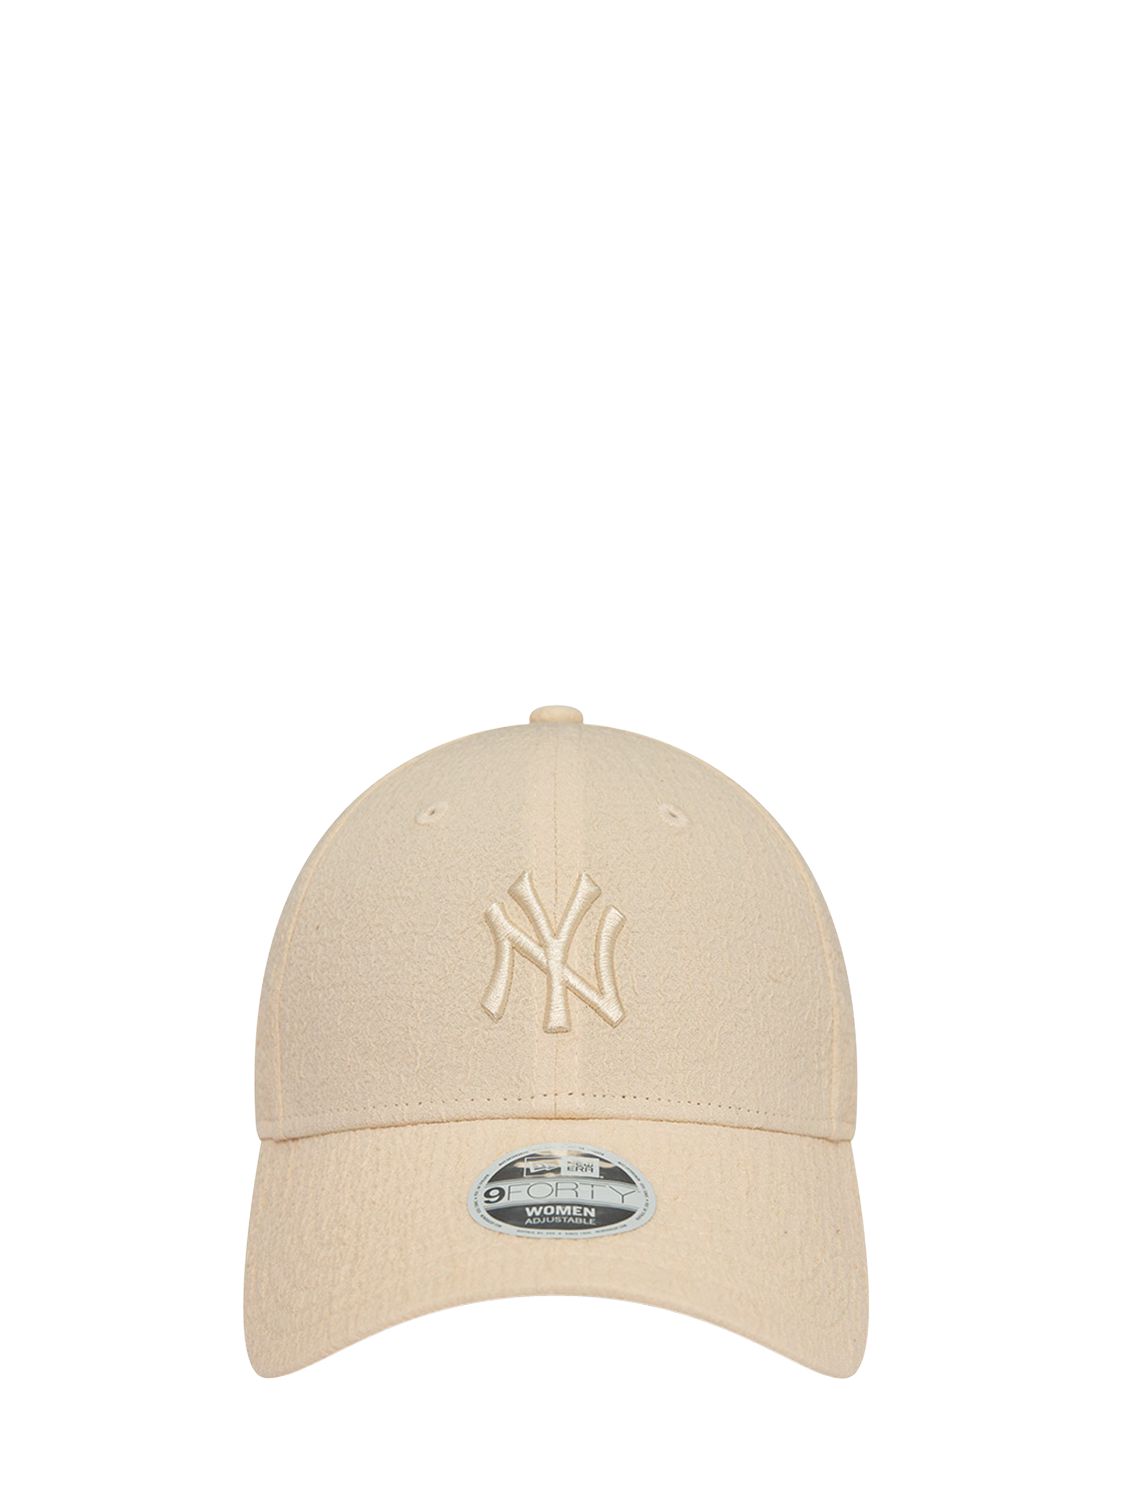 Image of Ny Yankees Bubble Stitch 9forty Hat